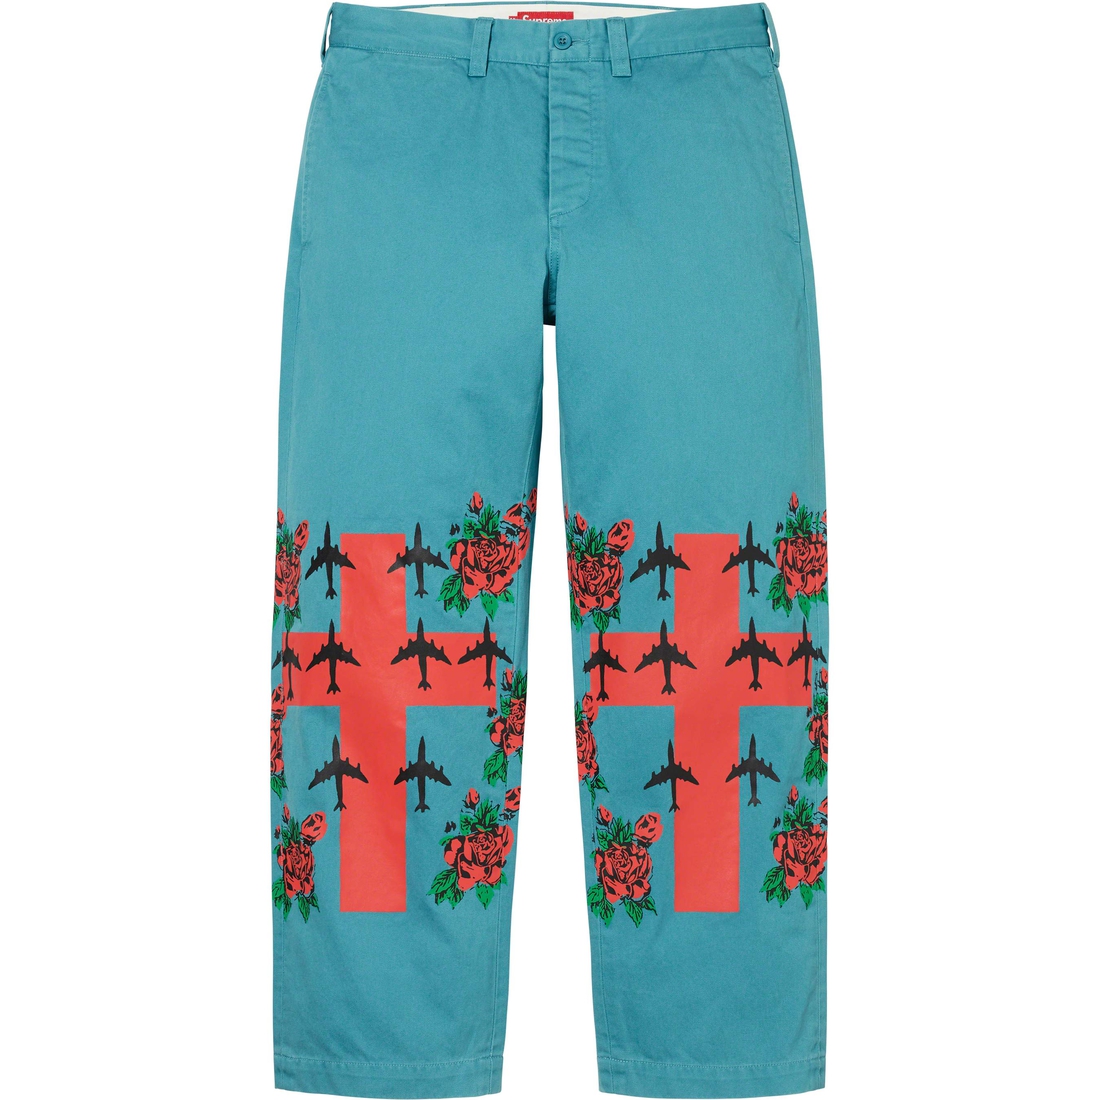 Details on Destruction of Purity Chino Pant Teal from spring summer 2023 (Price is $198)